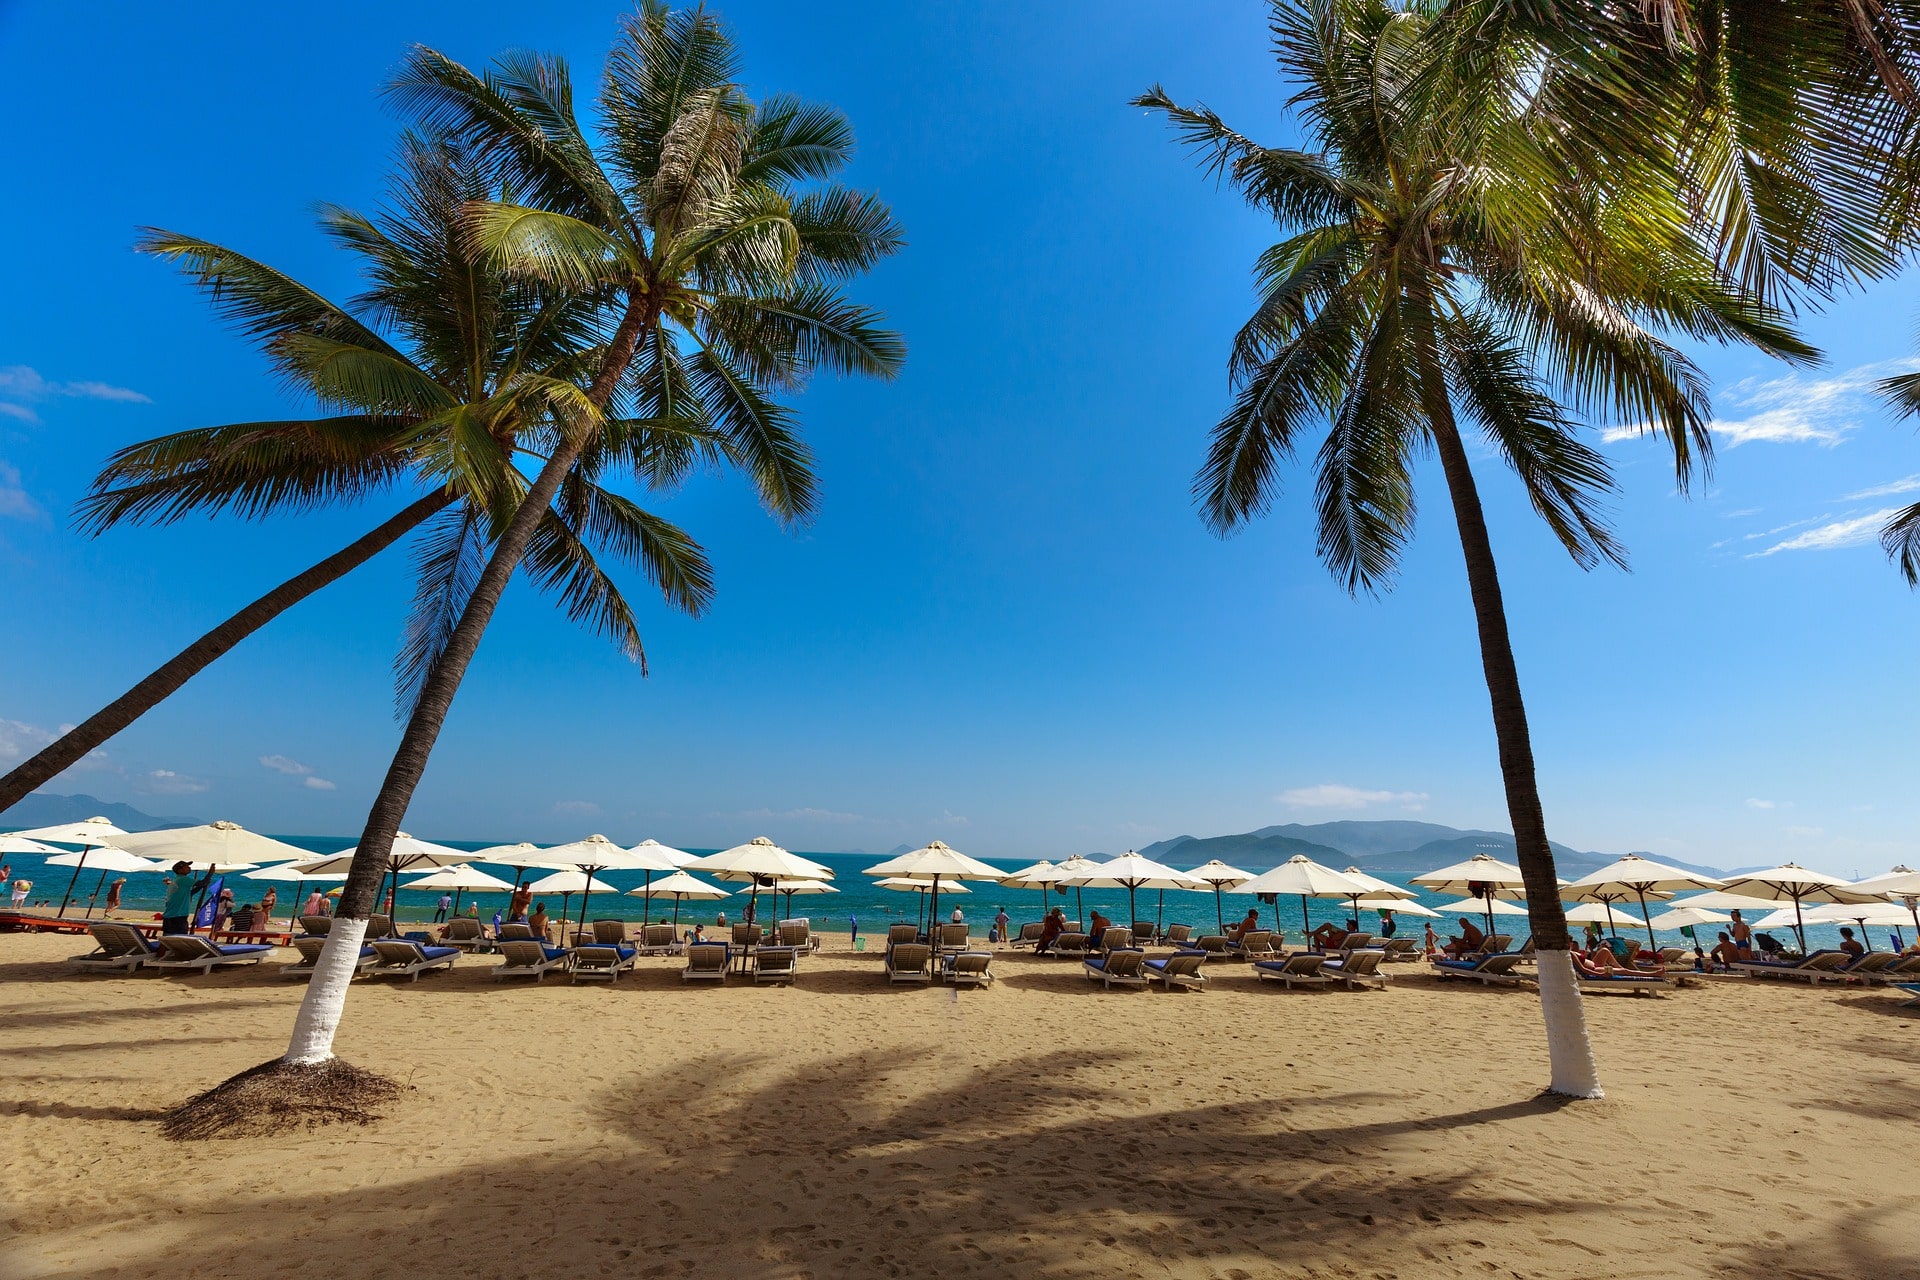 A Travel Guide to Nha Trang: The Gateway to the Southern Coast of Vietnam